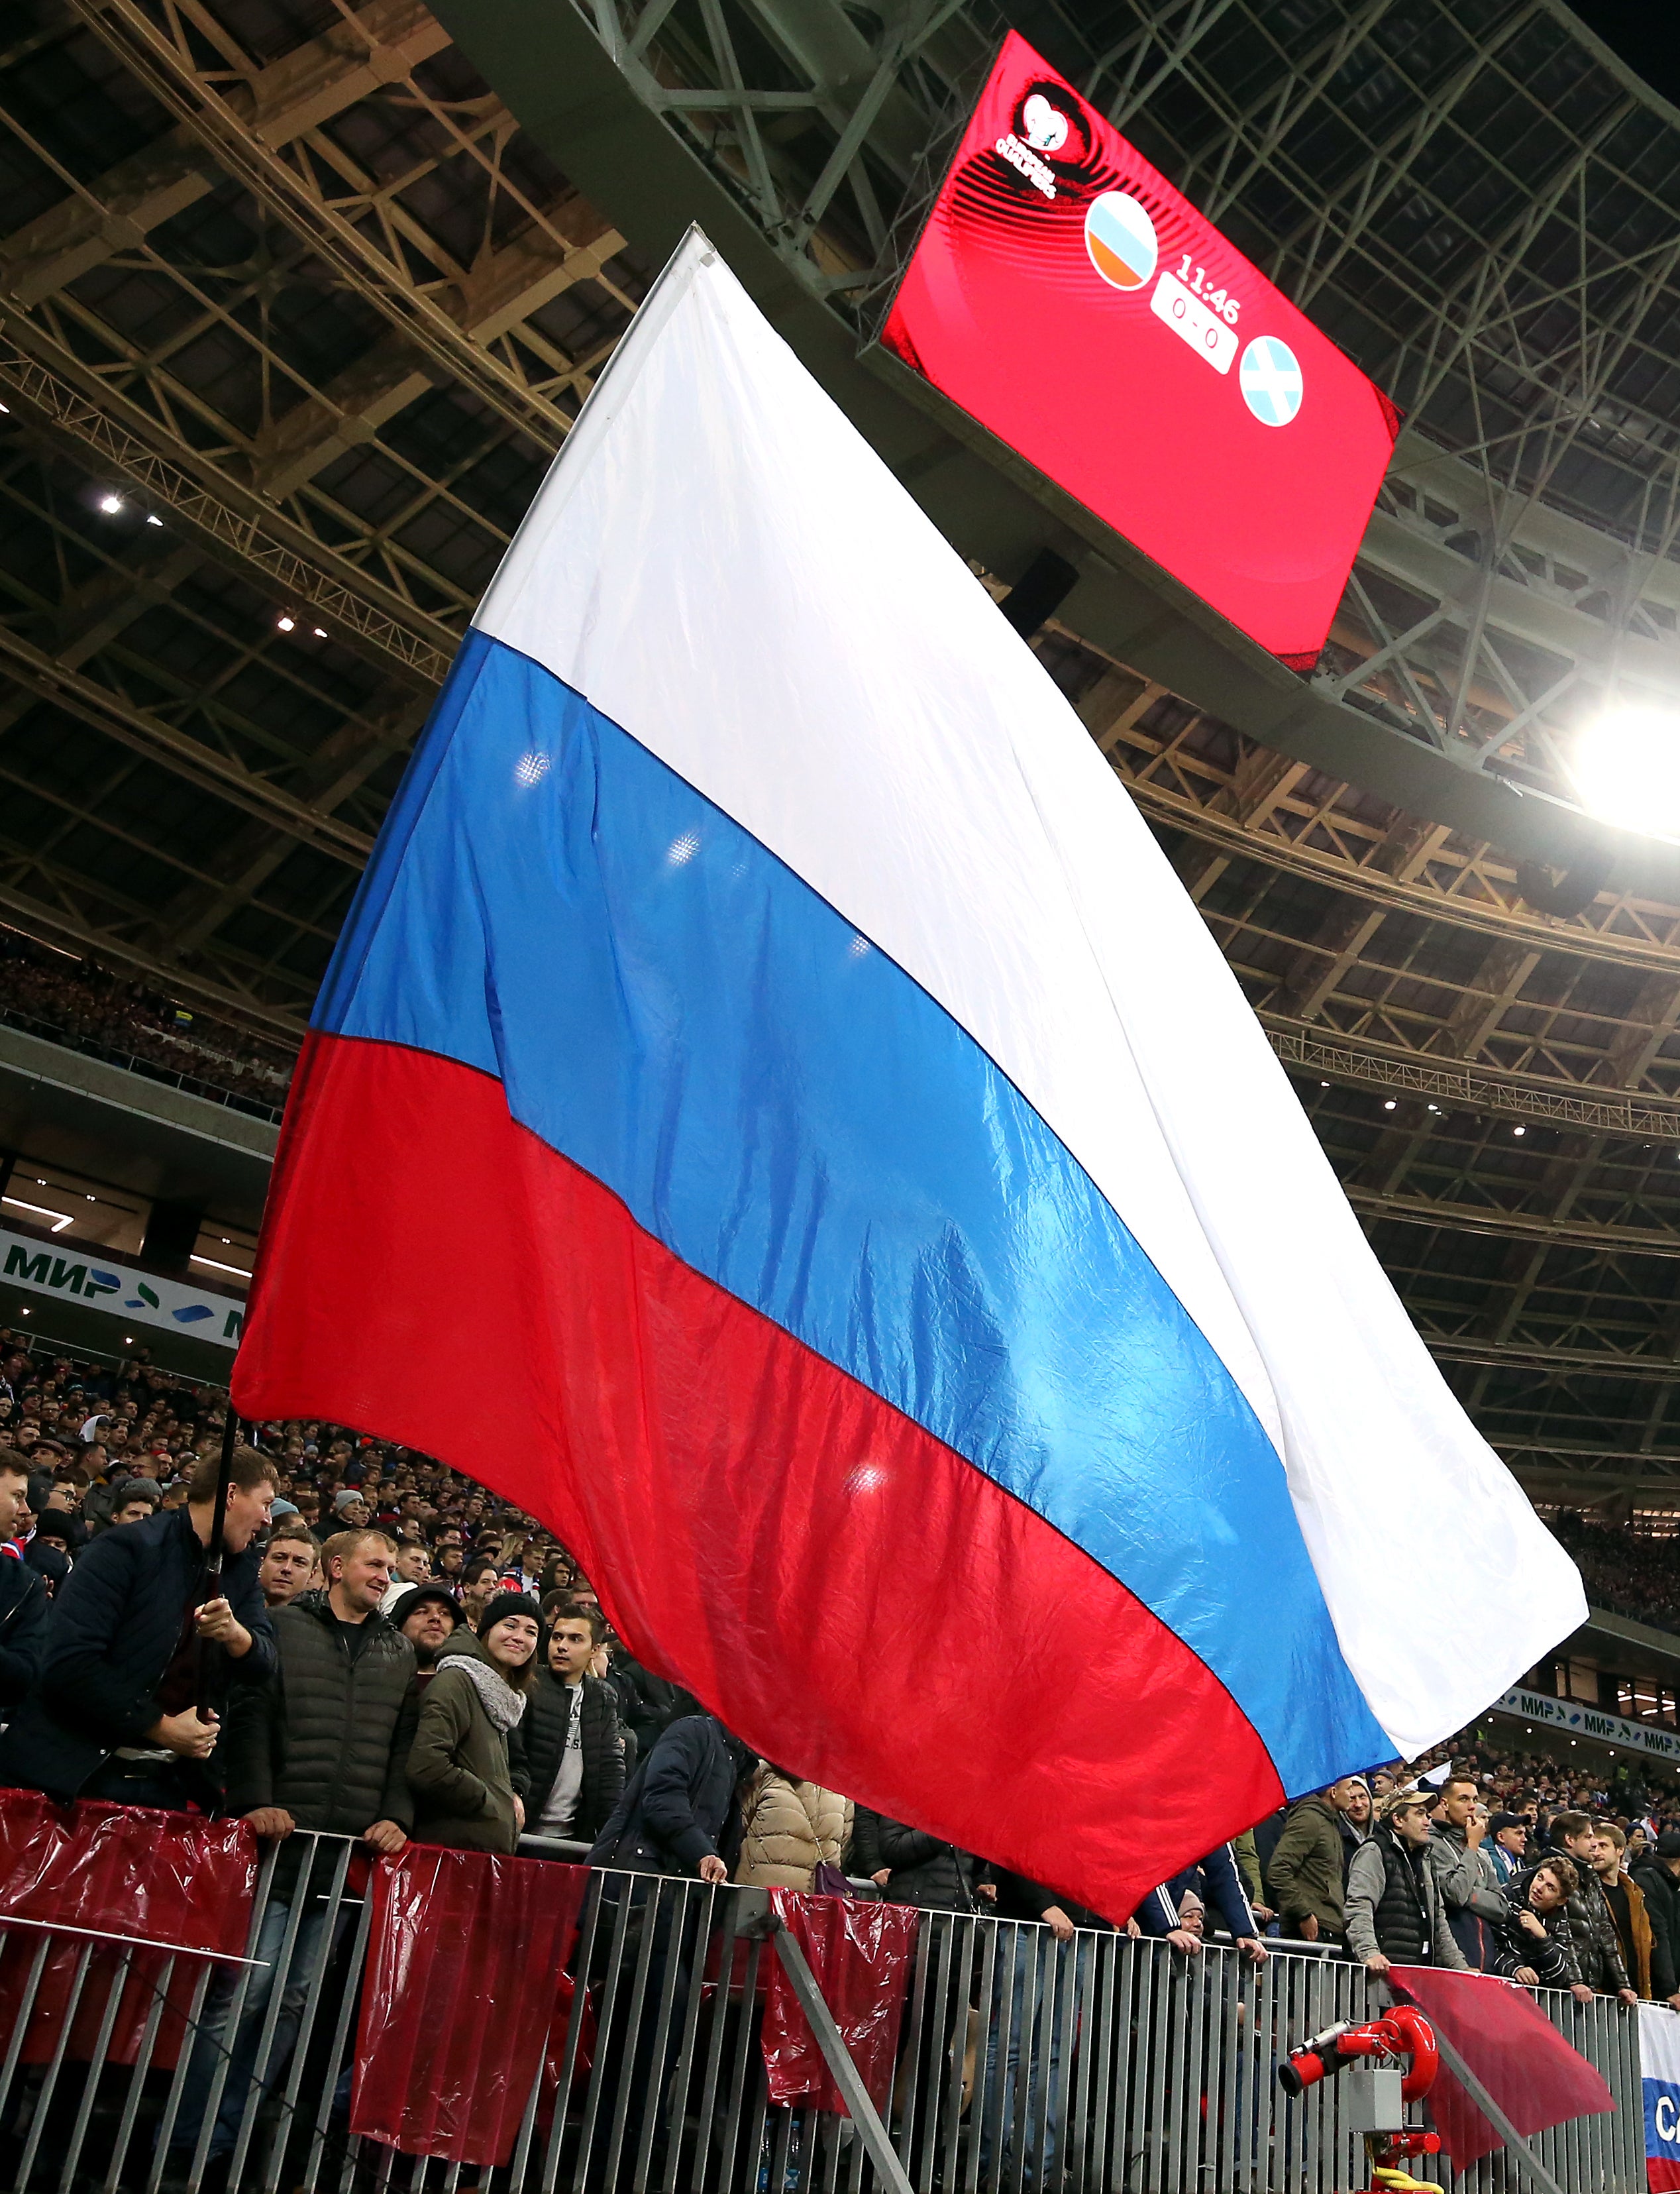 Russia’s World Cup hopes appear to be at an end after CAS rejected a request to stay a suspension imposed by FIFA (Steven Paston/PA)